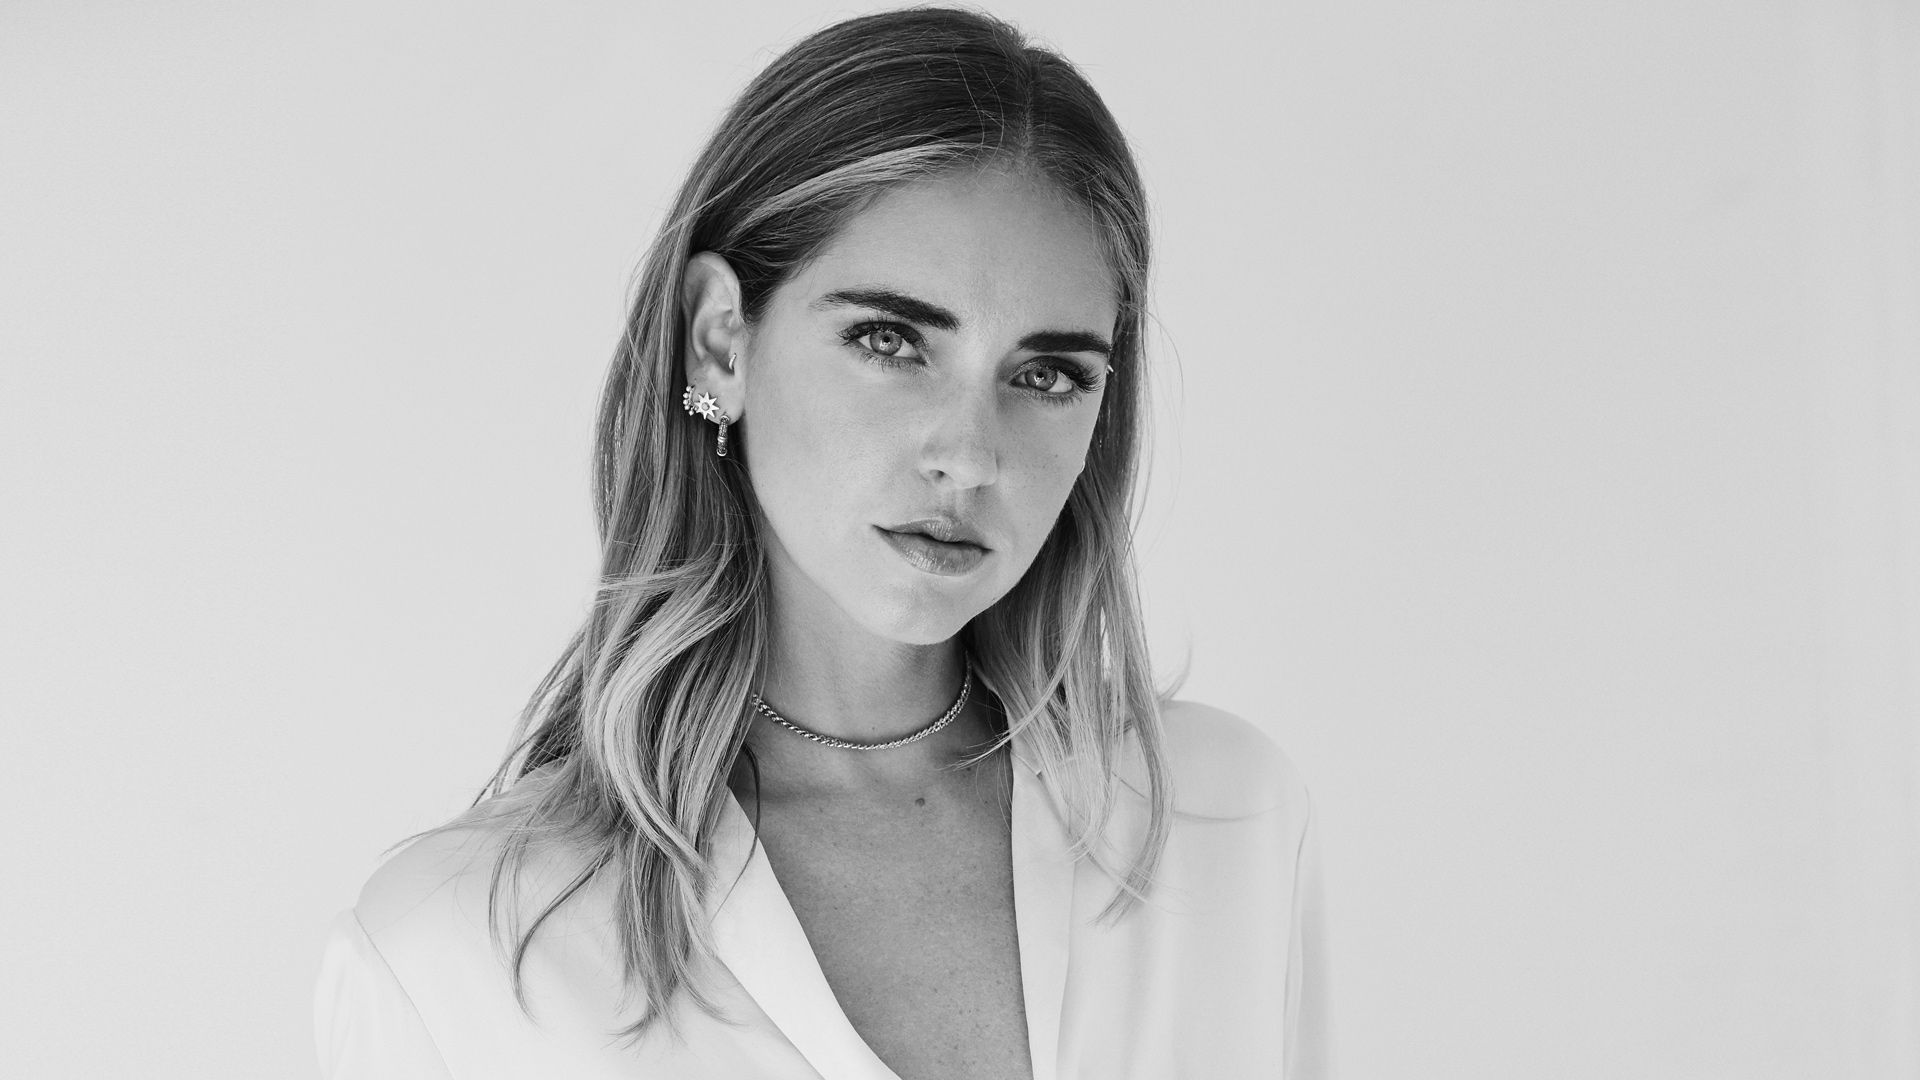 Vogue catches up with social media star Chiara Ferragni